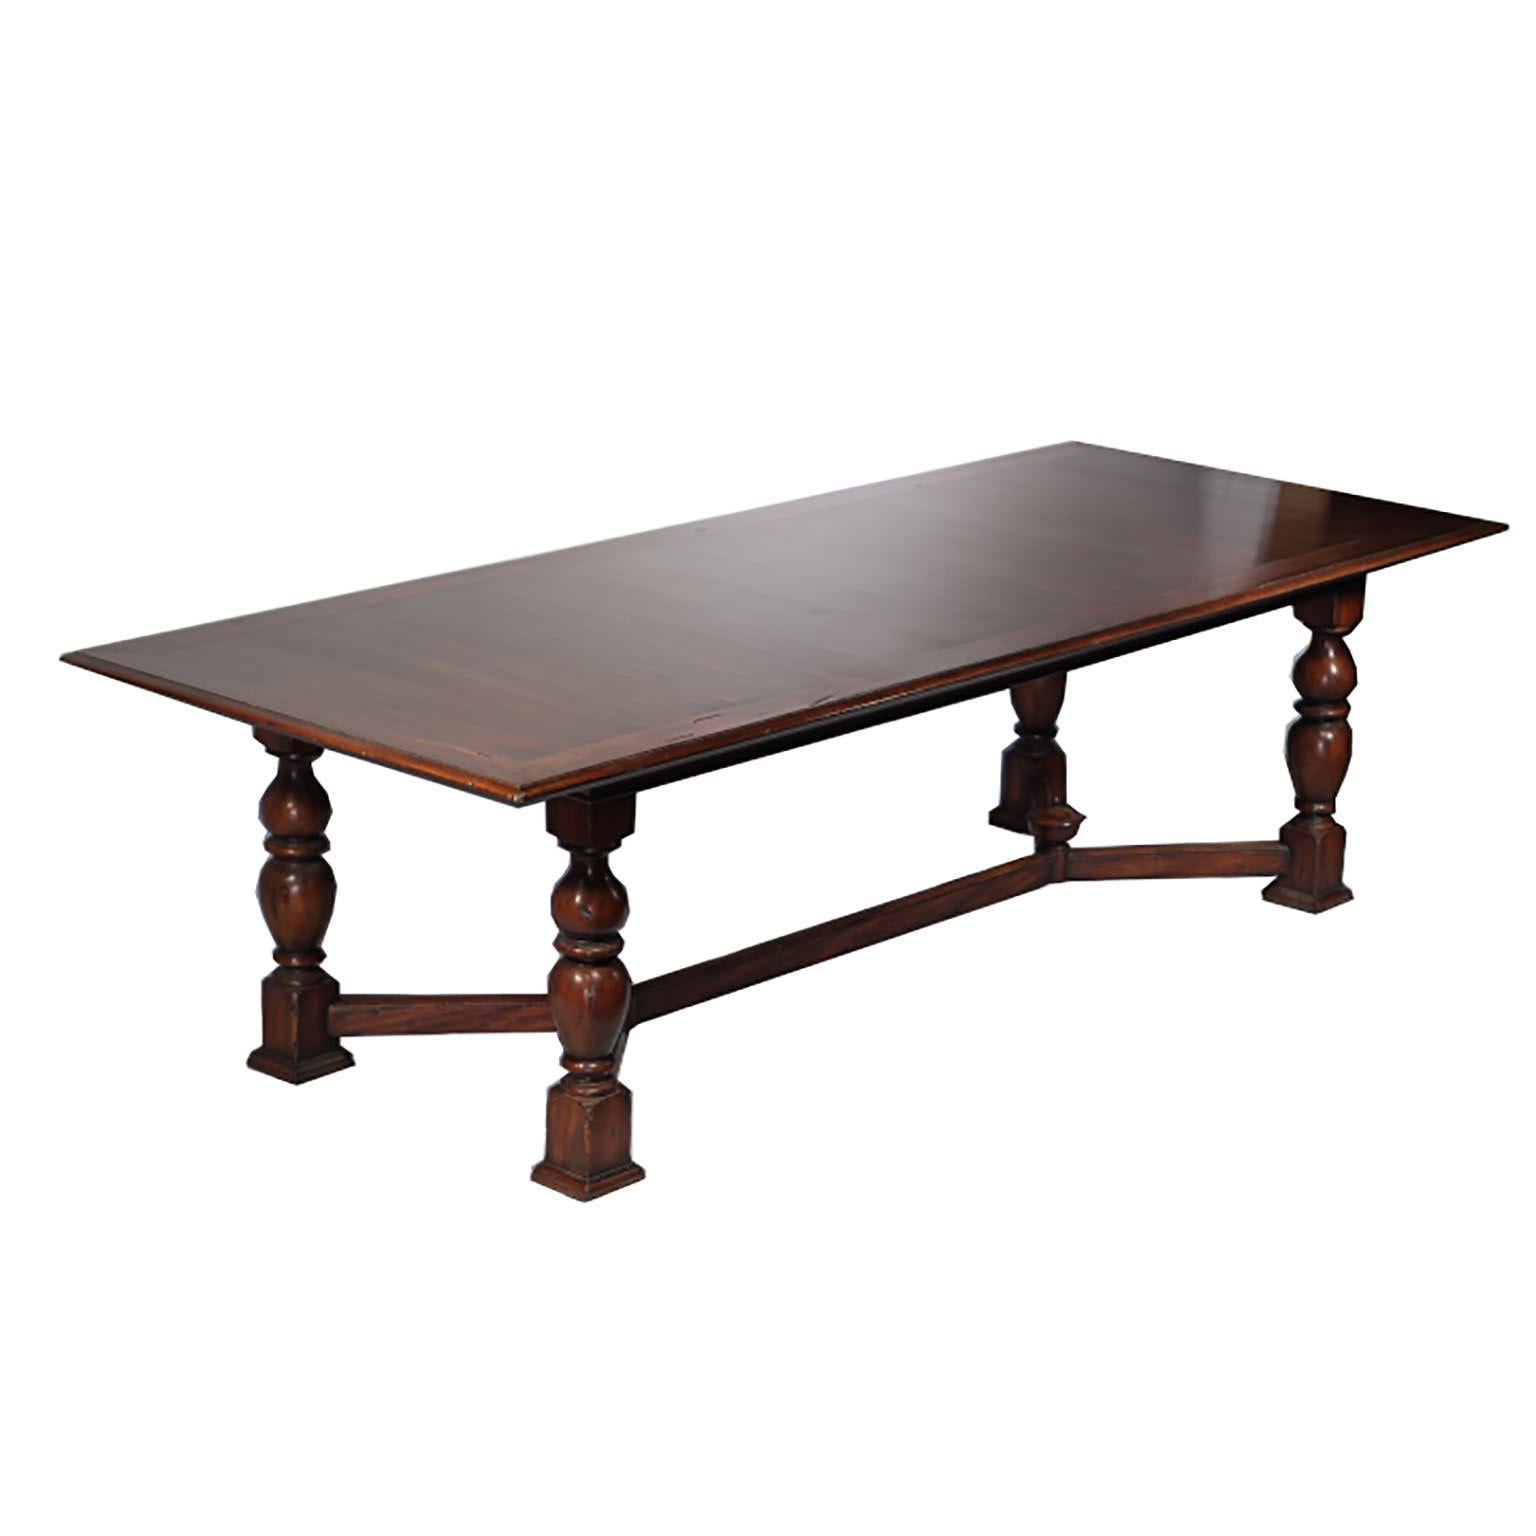 This is an original Alfonso Marina handcrafted dining table with hand carved legs and rich, Spanish cedarwood grain throughout the piece. This piece is very large at 9 feet in length.
             